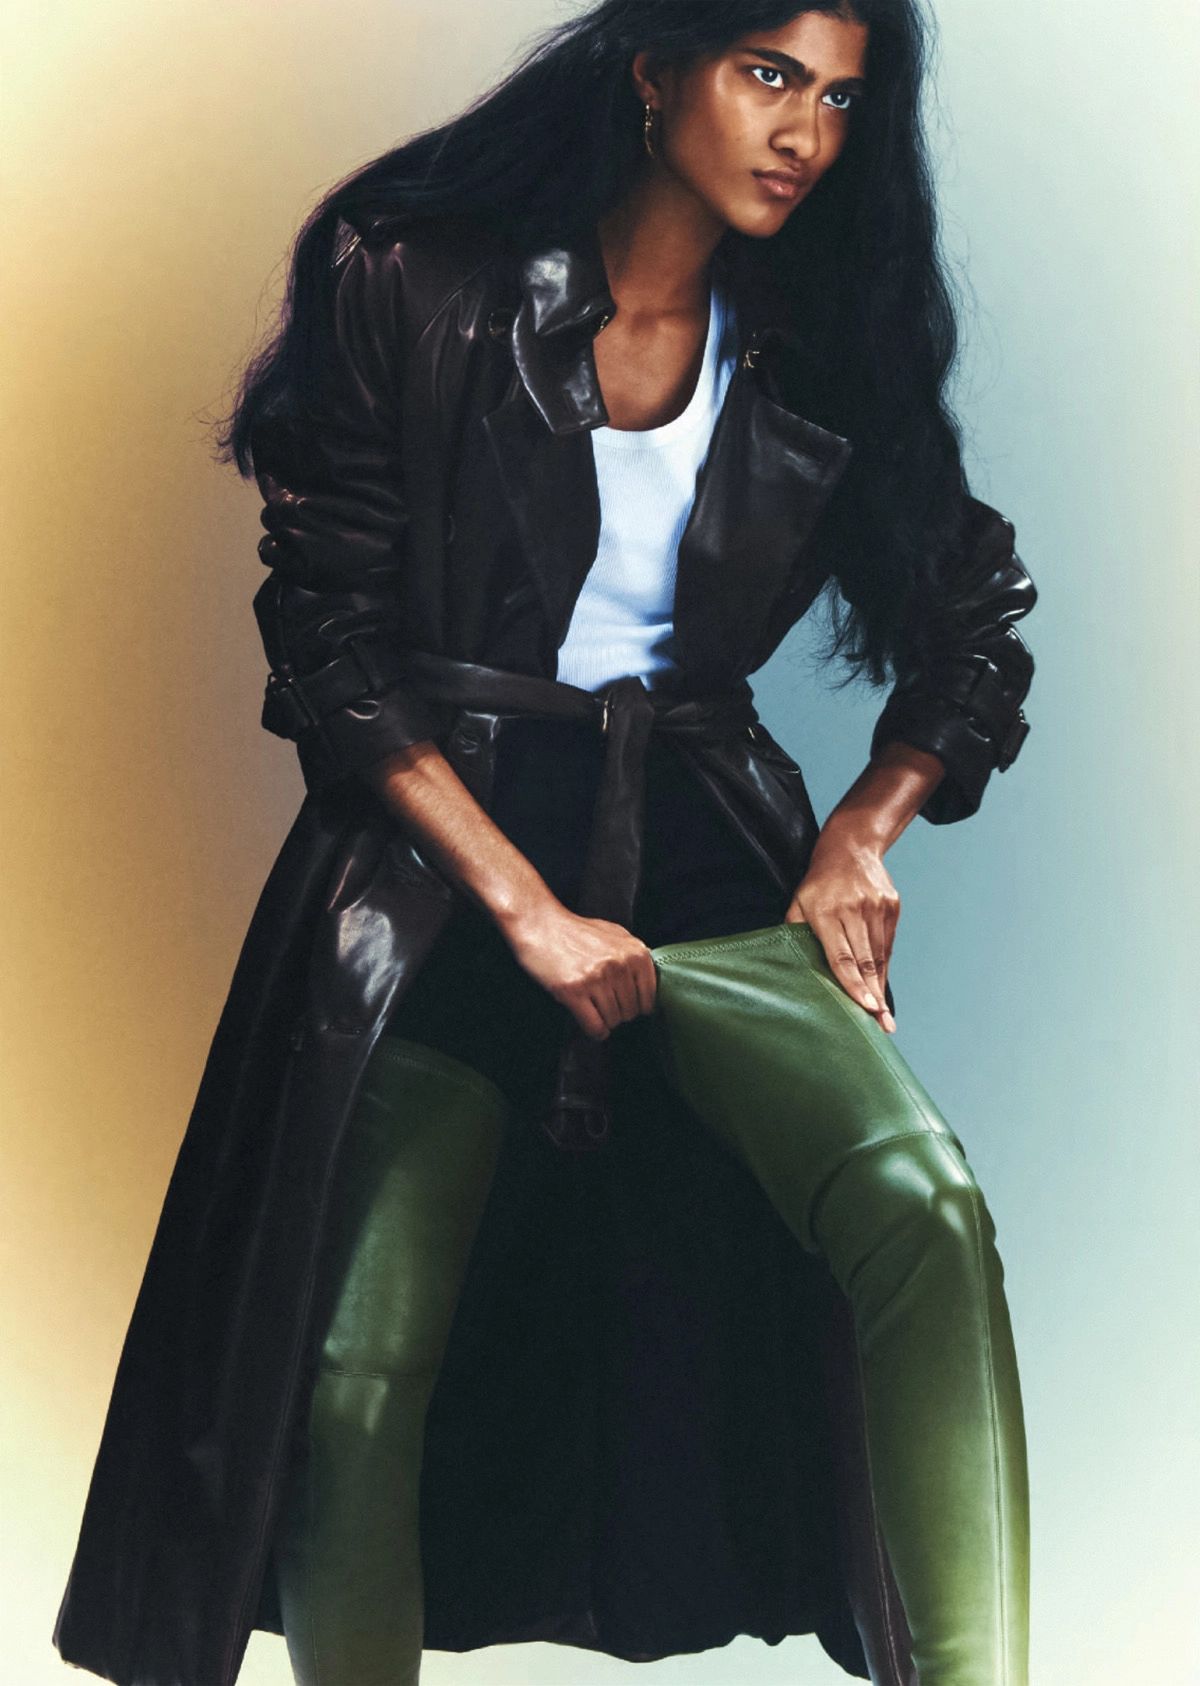 Ashley Radjarame by Thue Norgaard for British Vogue July 2022  Leather Trench Coat by Burberry / Stretch-Leather Boots by Burberry / White Organic Cotton Tank Top by Sunspel / Black Seamless Sculpt Sculpting Mid-Thigh Shorts by SKIMS 